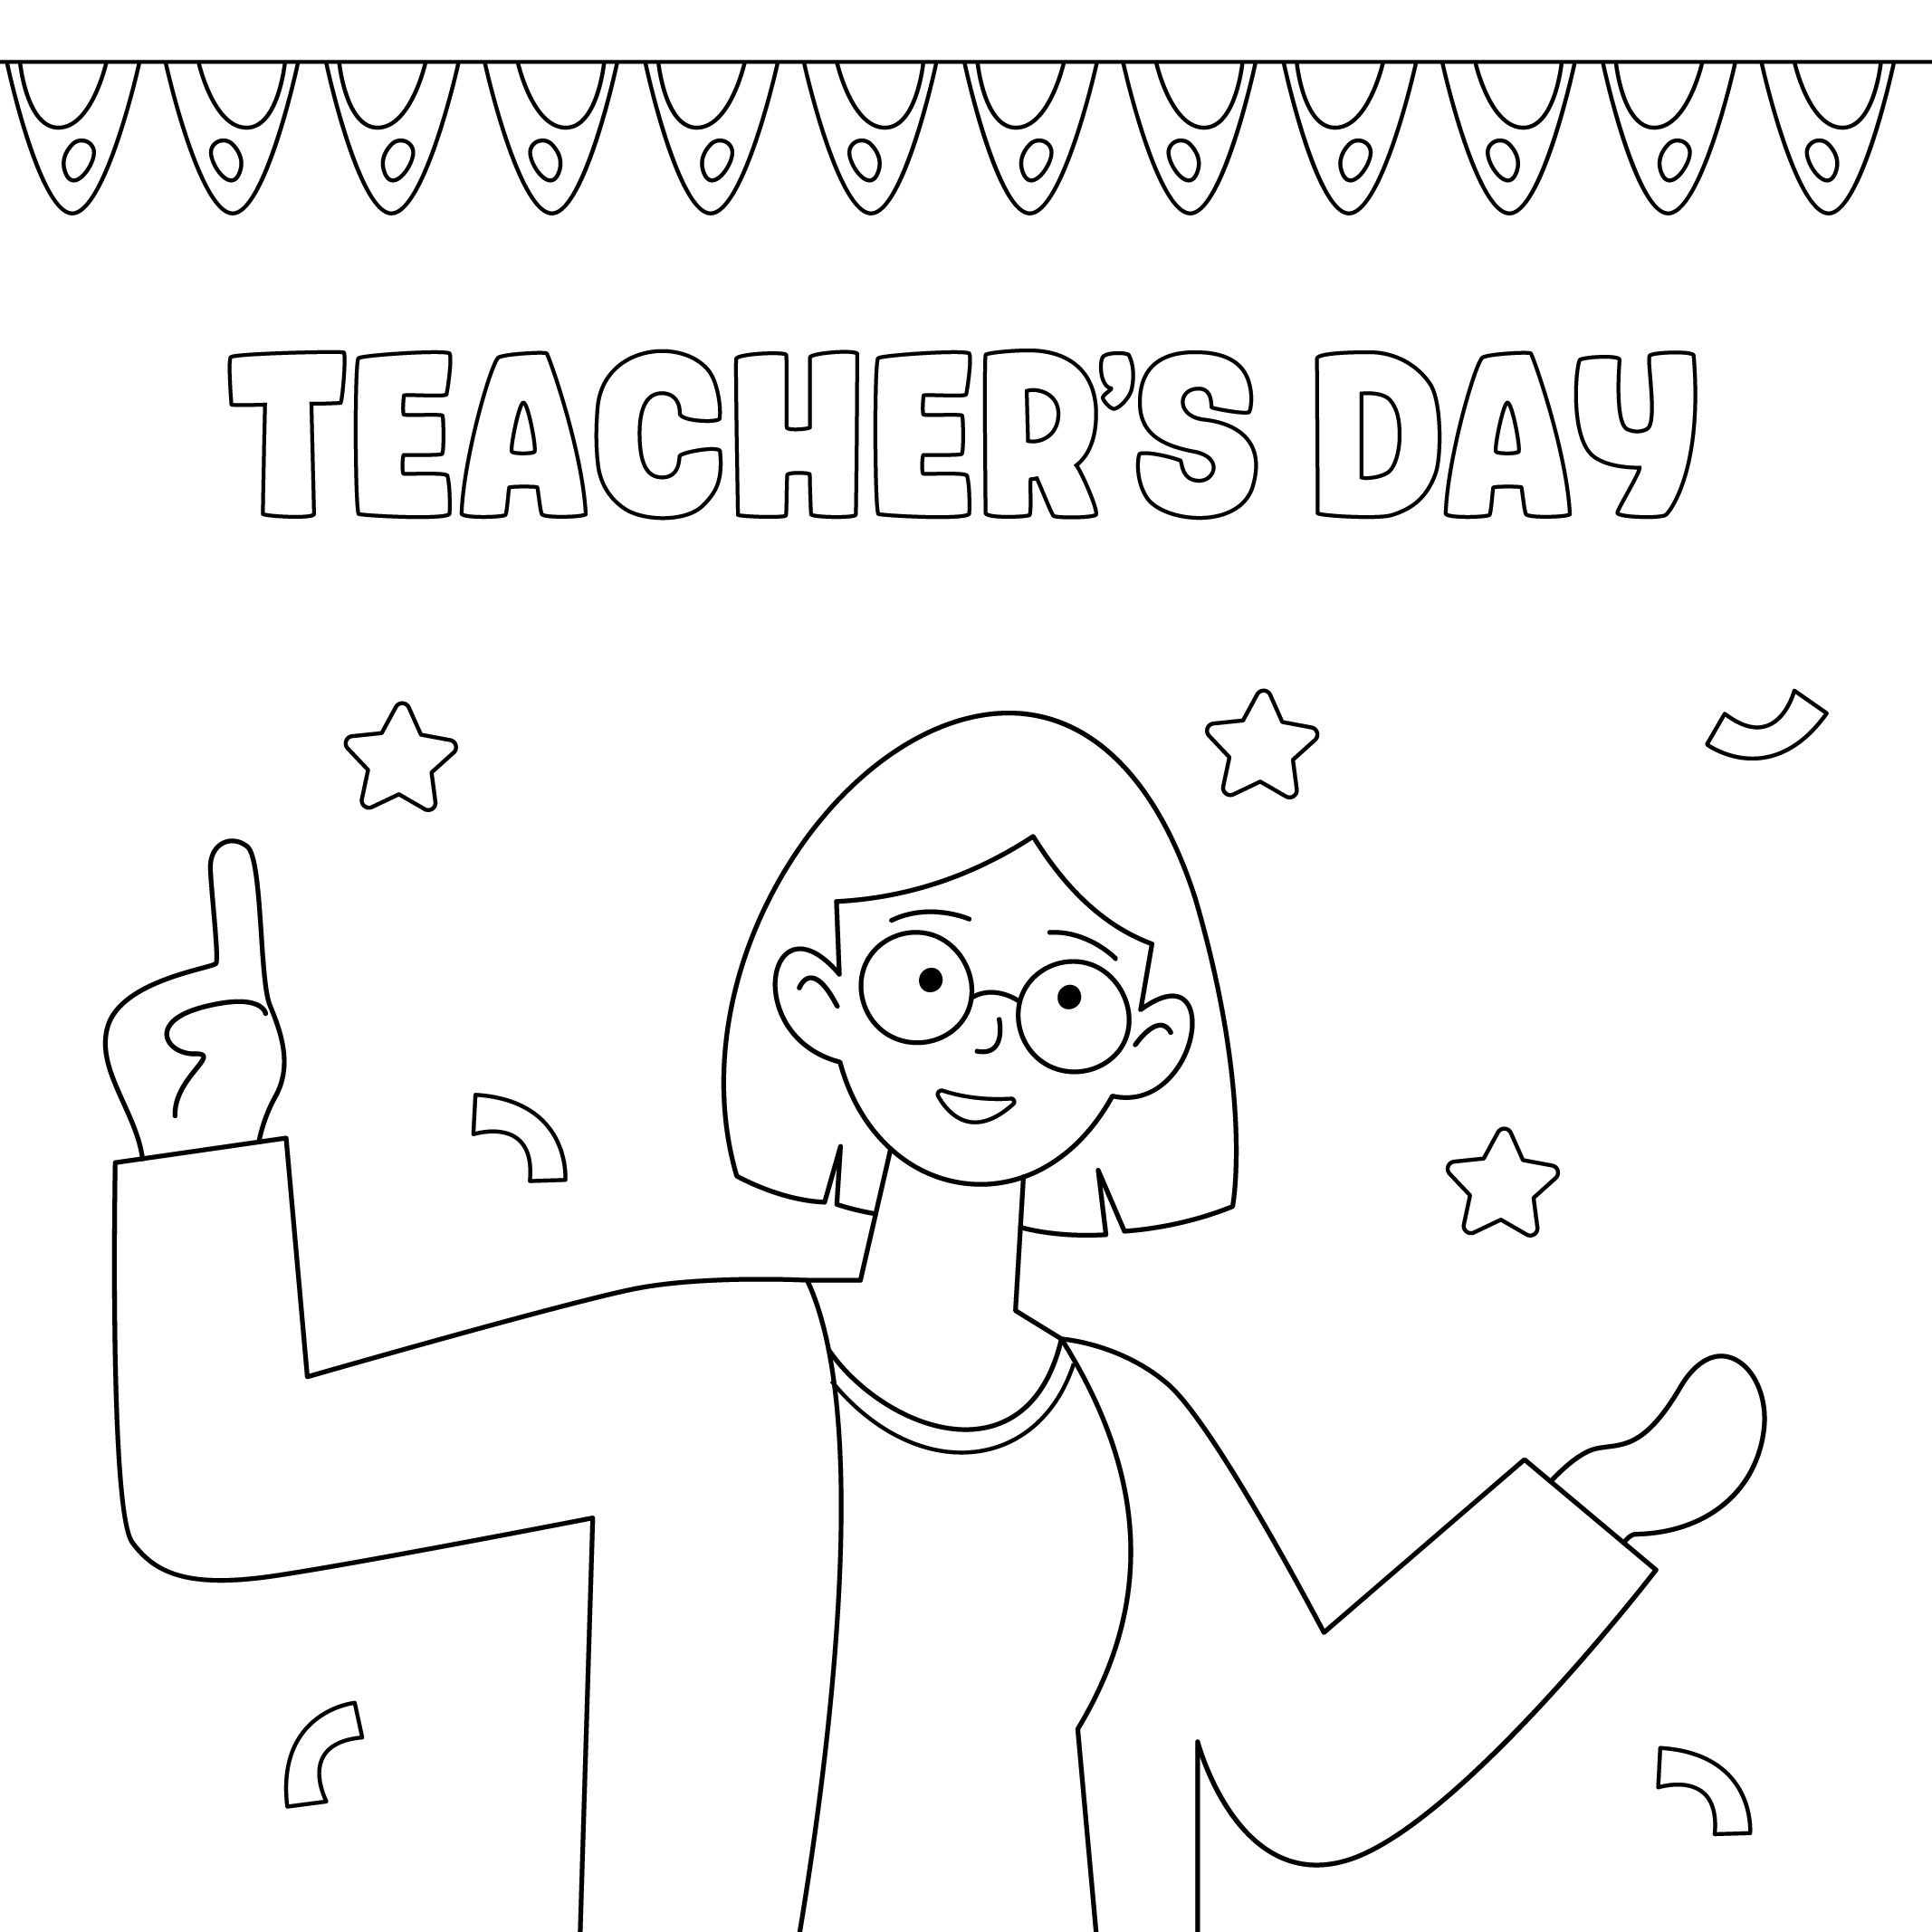 FREE Teacher's Day Drawing - Image Download in Word, Google Docs, PDF ...